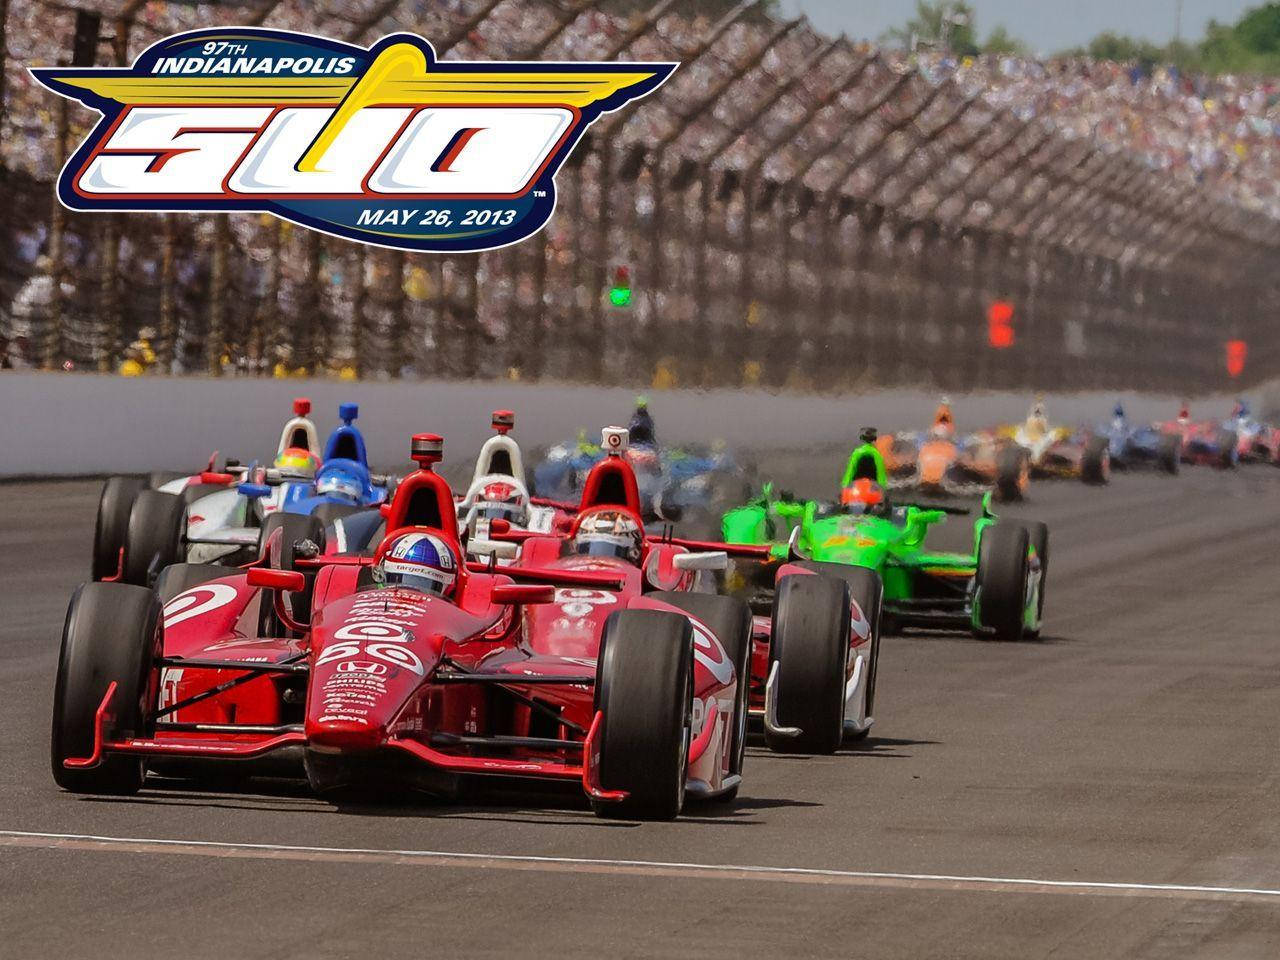 97th Indianapolis 500 Cover Wallpaper